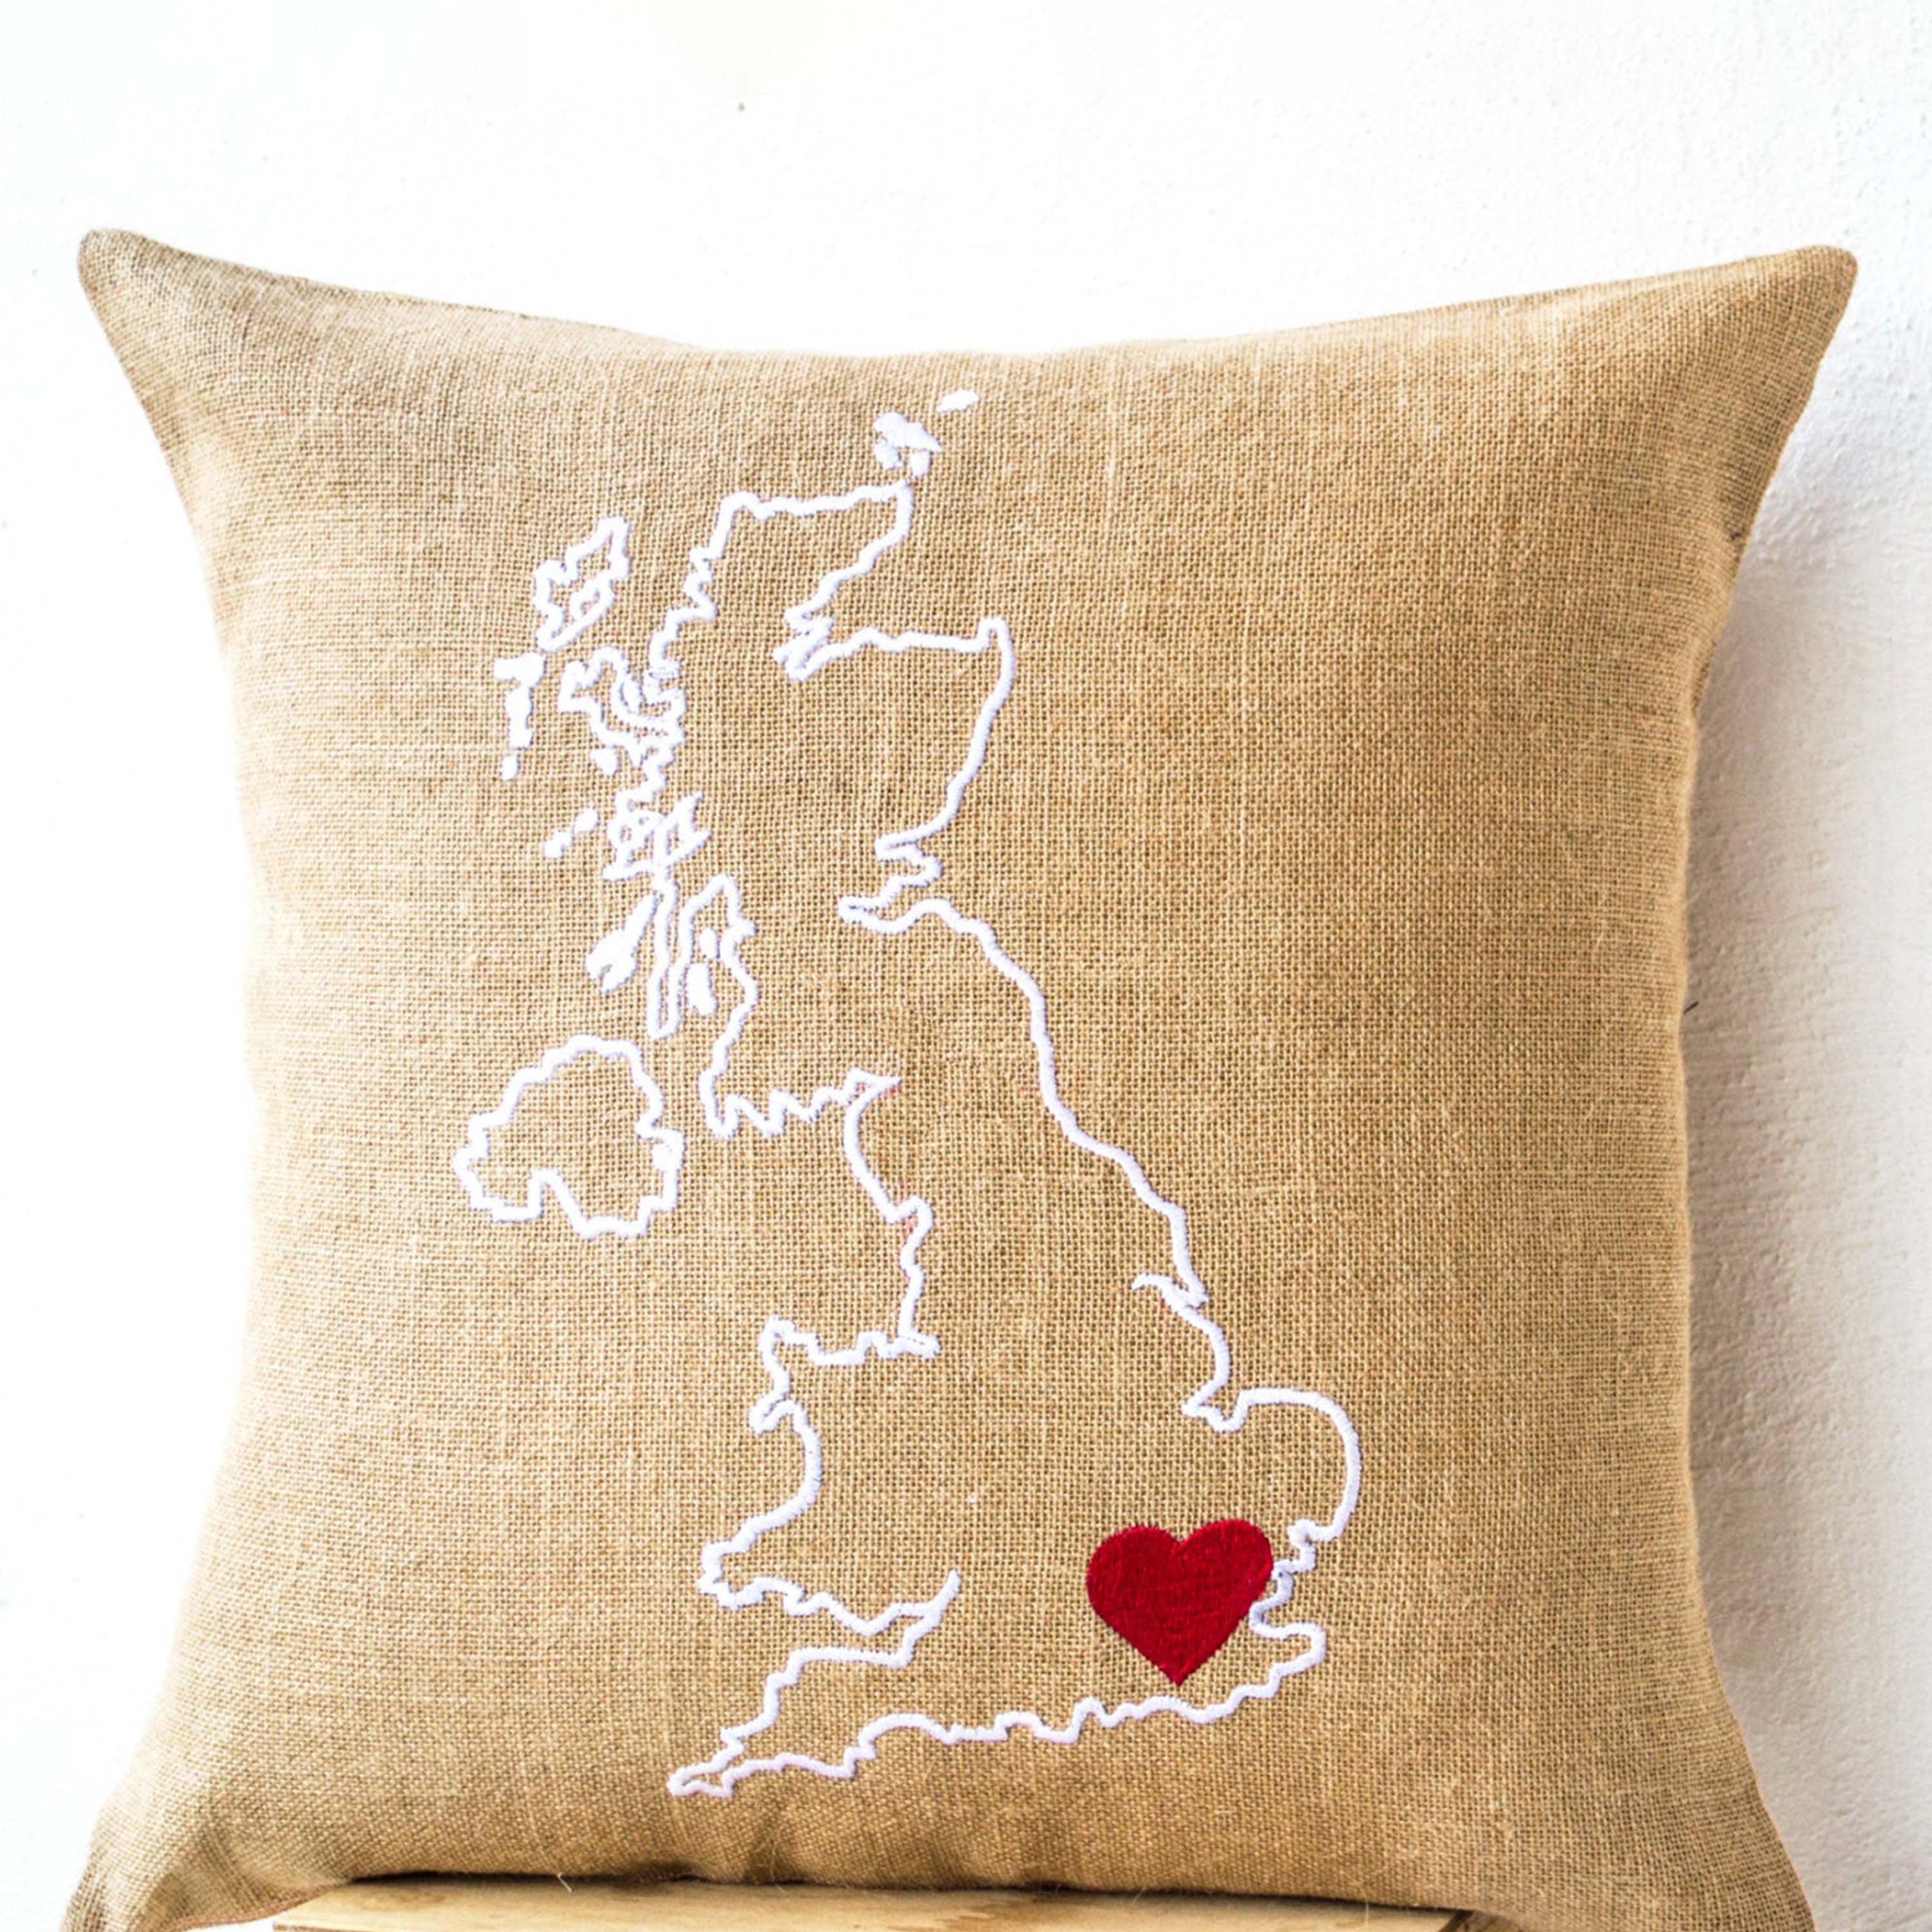 Burlap Pillows Country Map Cushion Personalized Embroidered Cushion Cover Monogrammed